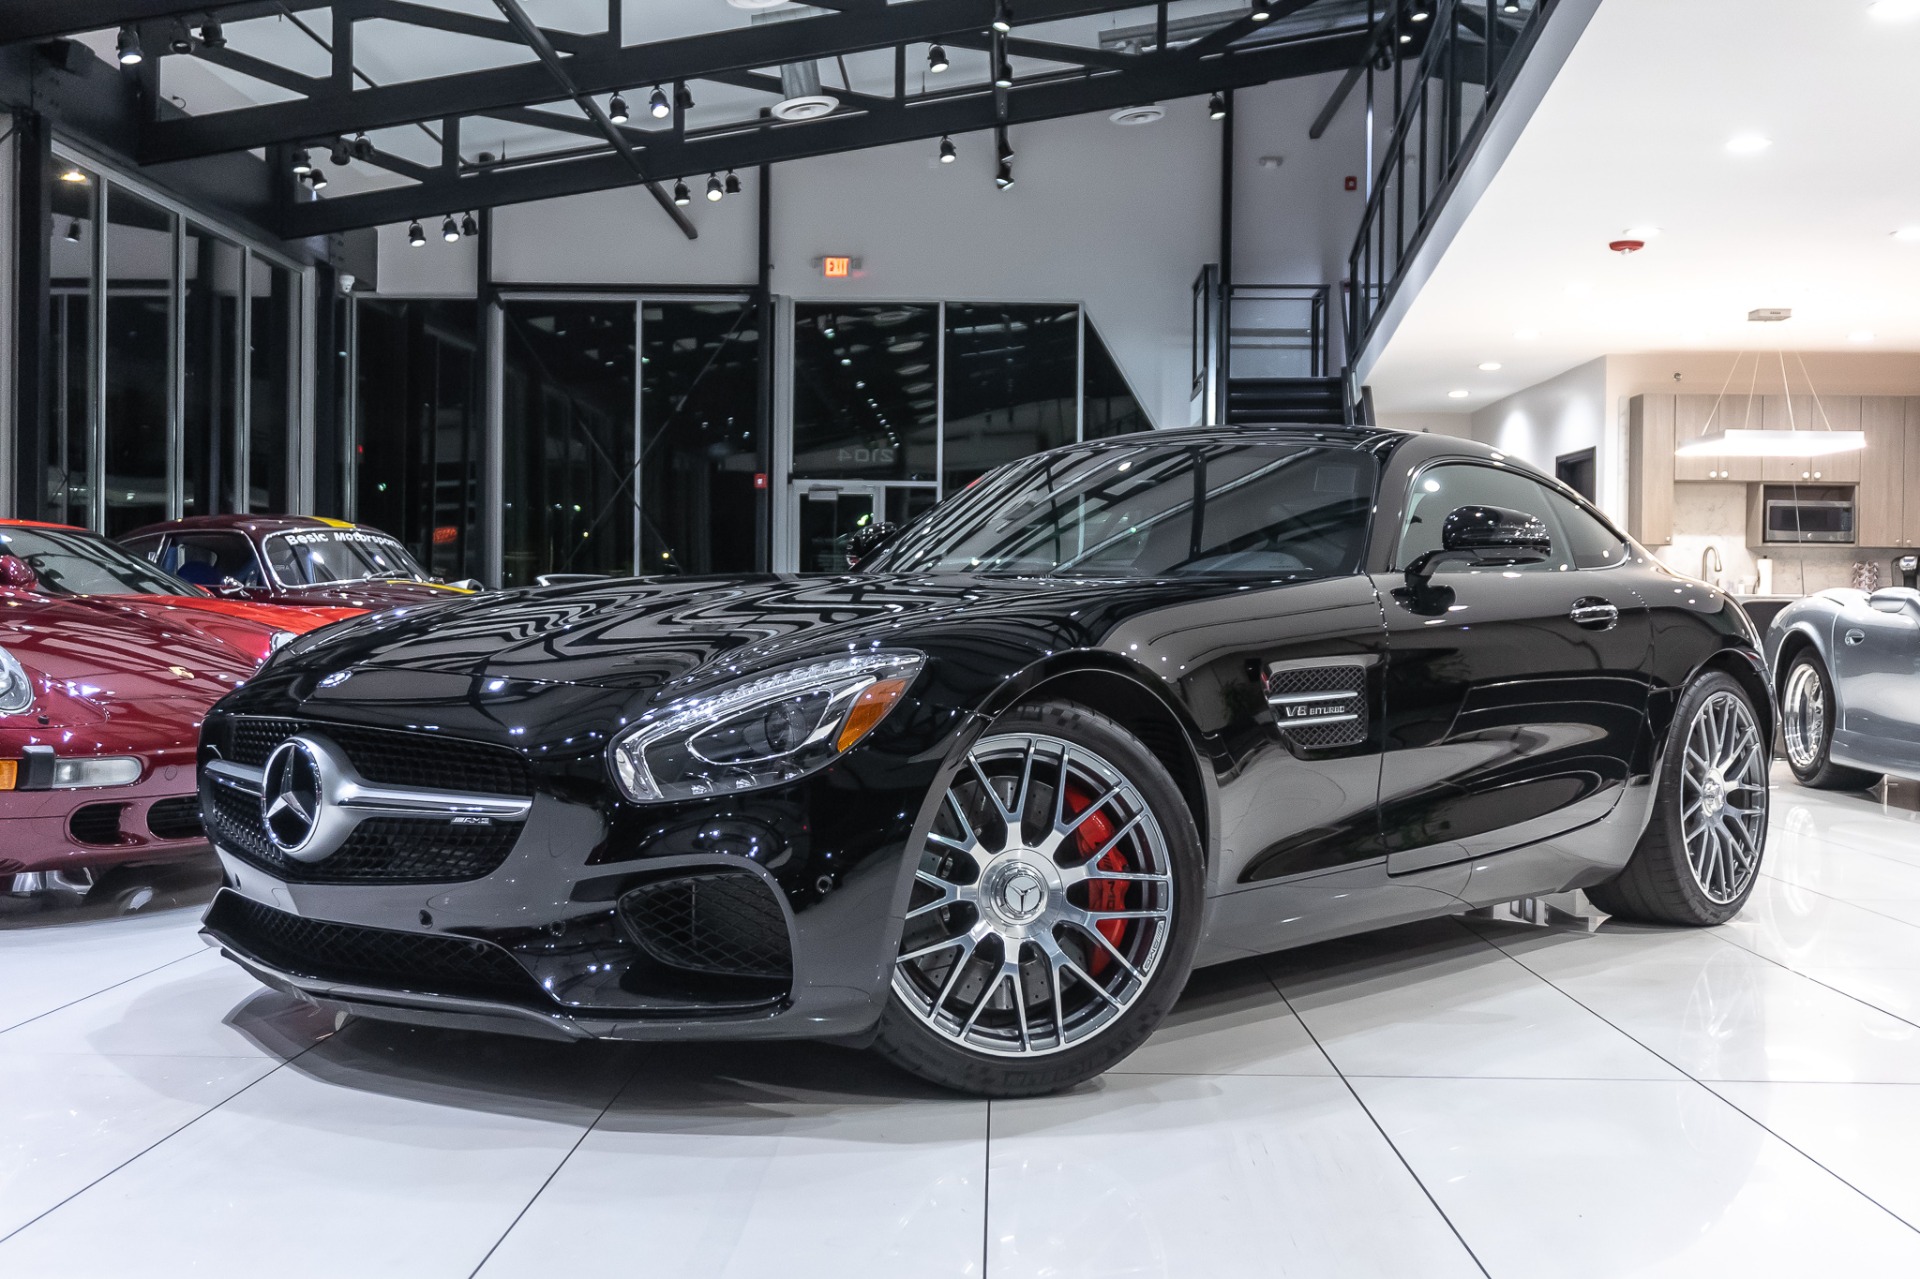 Used-2017-Mercedes-Benz-AMG-GT-S-DYNAMIC-PLUS-PKG-PANO-139485-MSRP-ONLY-14K-MILES